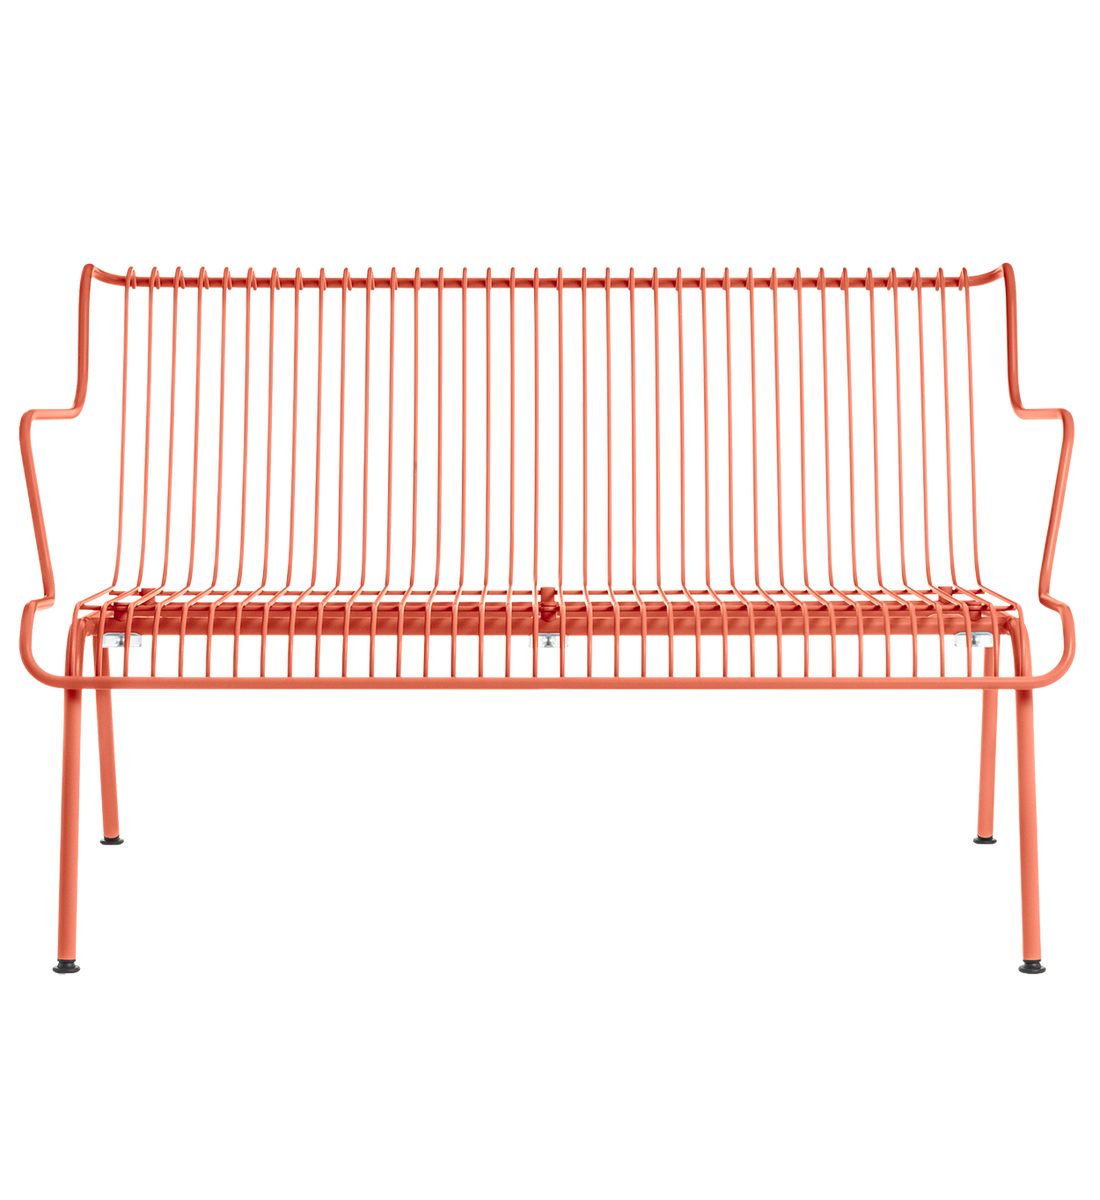 Magis South low bench outdoor